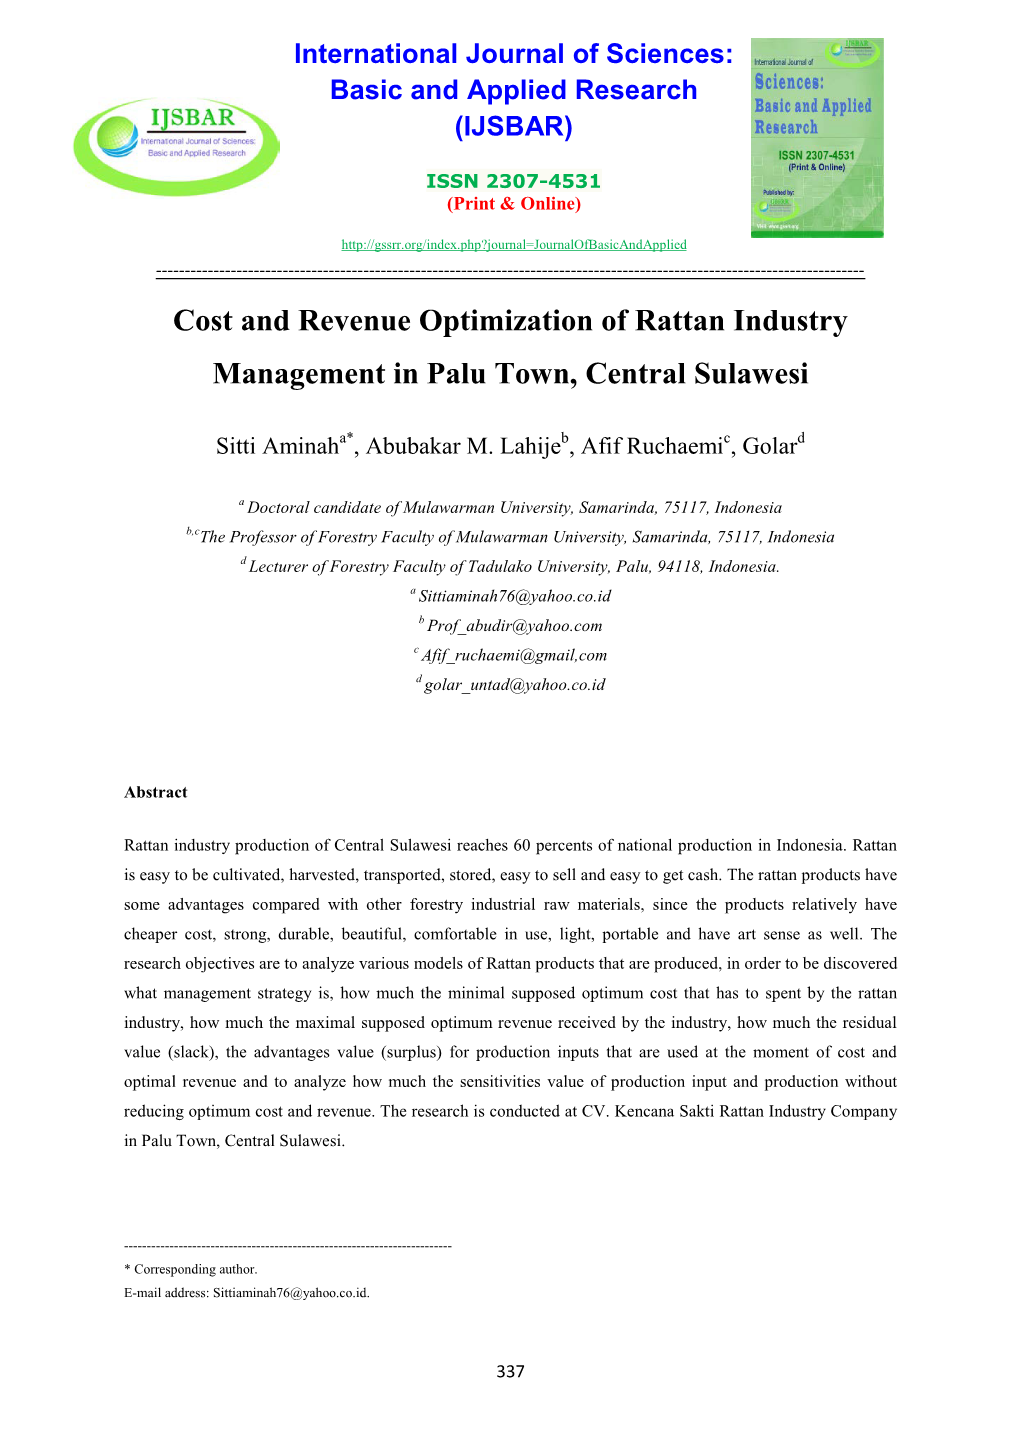 Cost and Revenue Optimization of Rattan Industry Management in Palu Town, Central Sulawesi